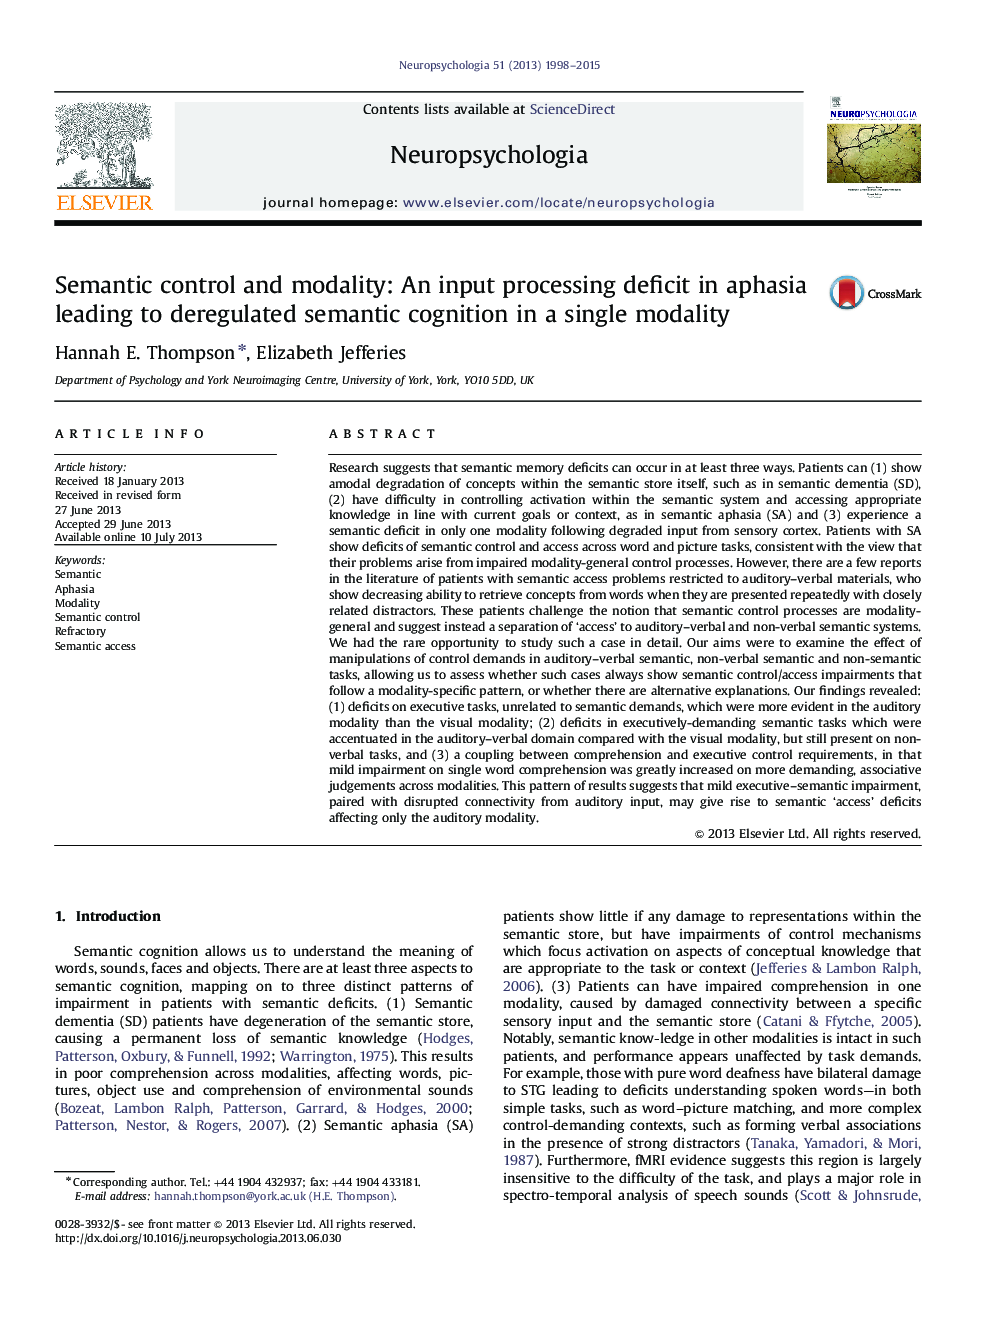 Semantic control and modality: An input processing deficit in aphasia leading to deregulated semantic cognition in a single modality